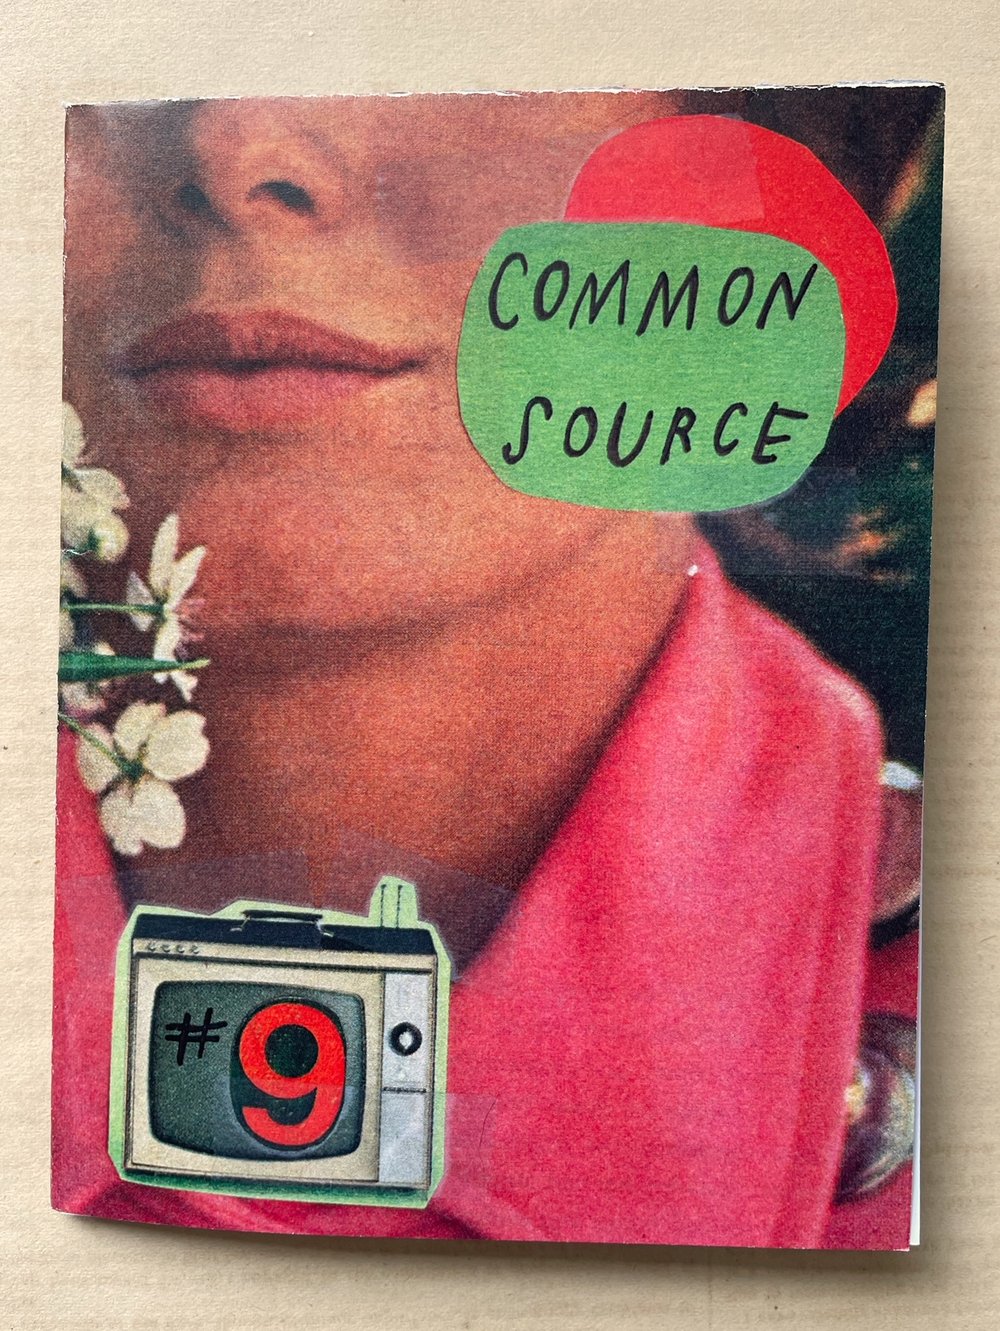 COMMON SOURCE #9 by Mary Lamb